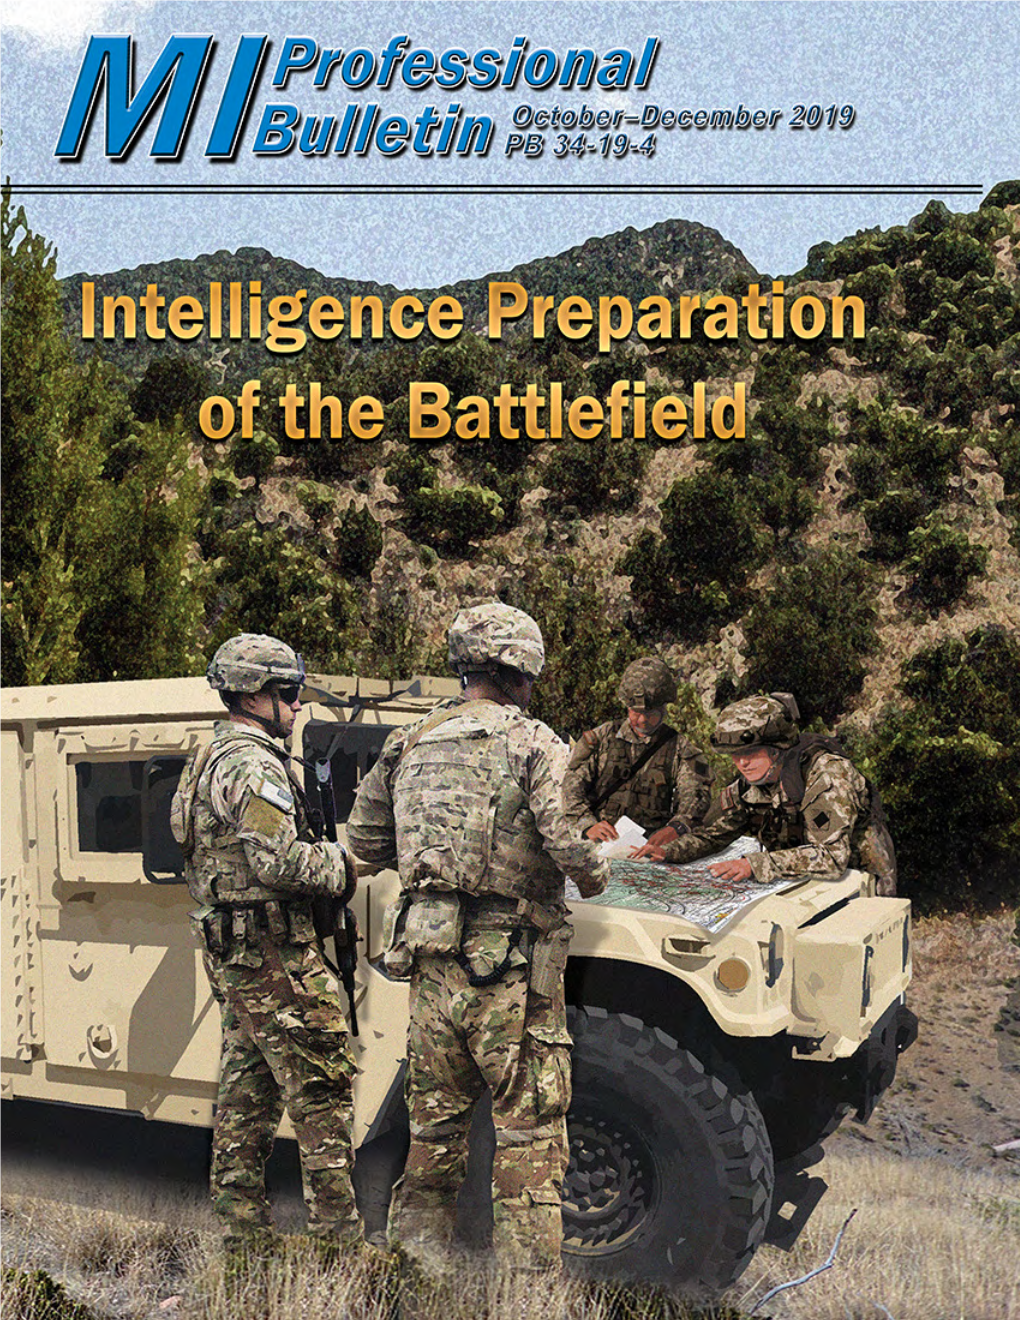 Intelligence Preparation of the Battlefield: Why the Update? by MAJ James H